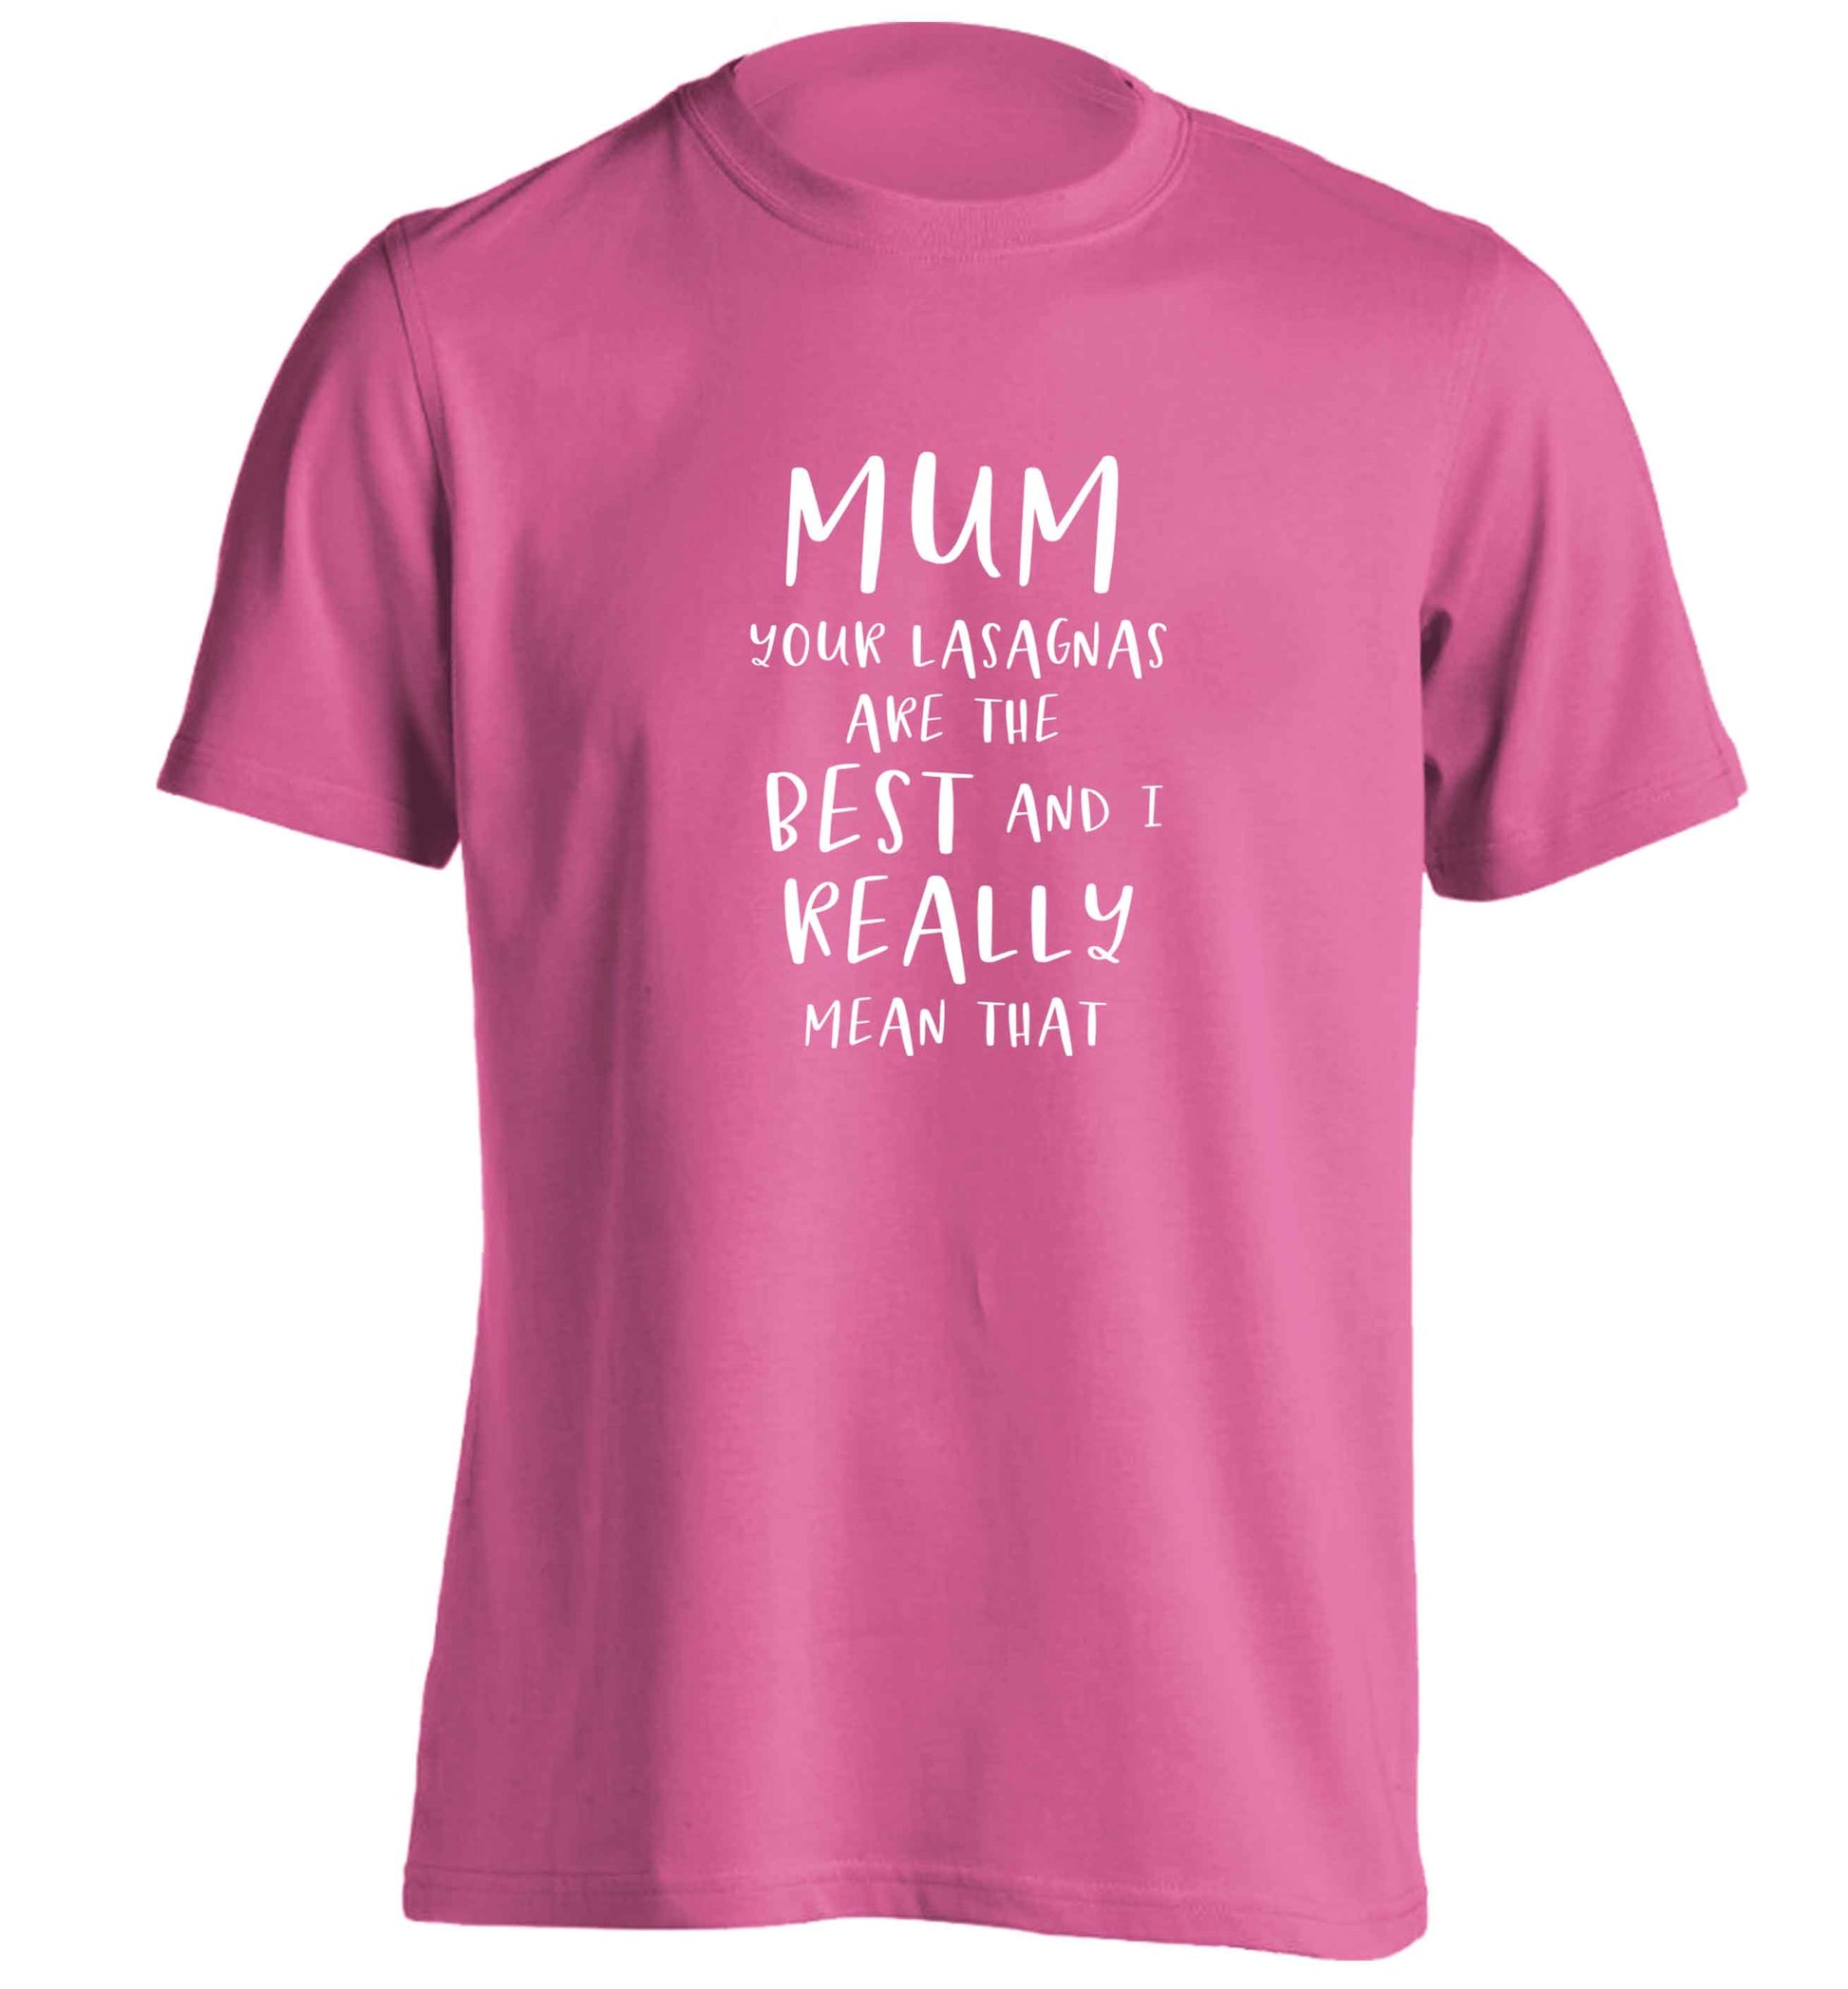 Funny gifts for your mum on mother's dayor her birthday! Mum your lasagnas are the best and I really mean that adults unisex pink Tshirt 2XL